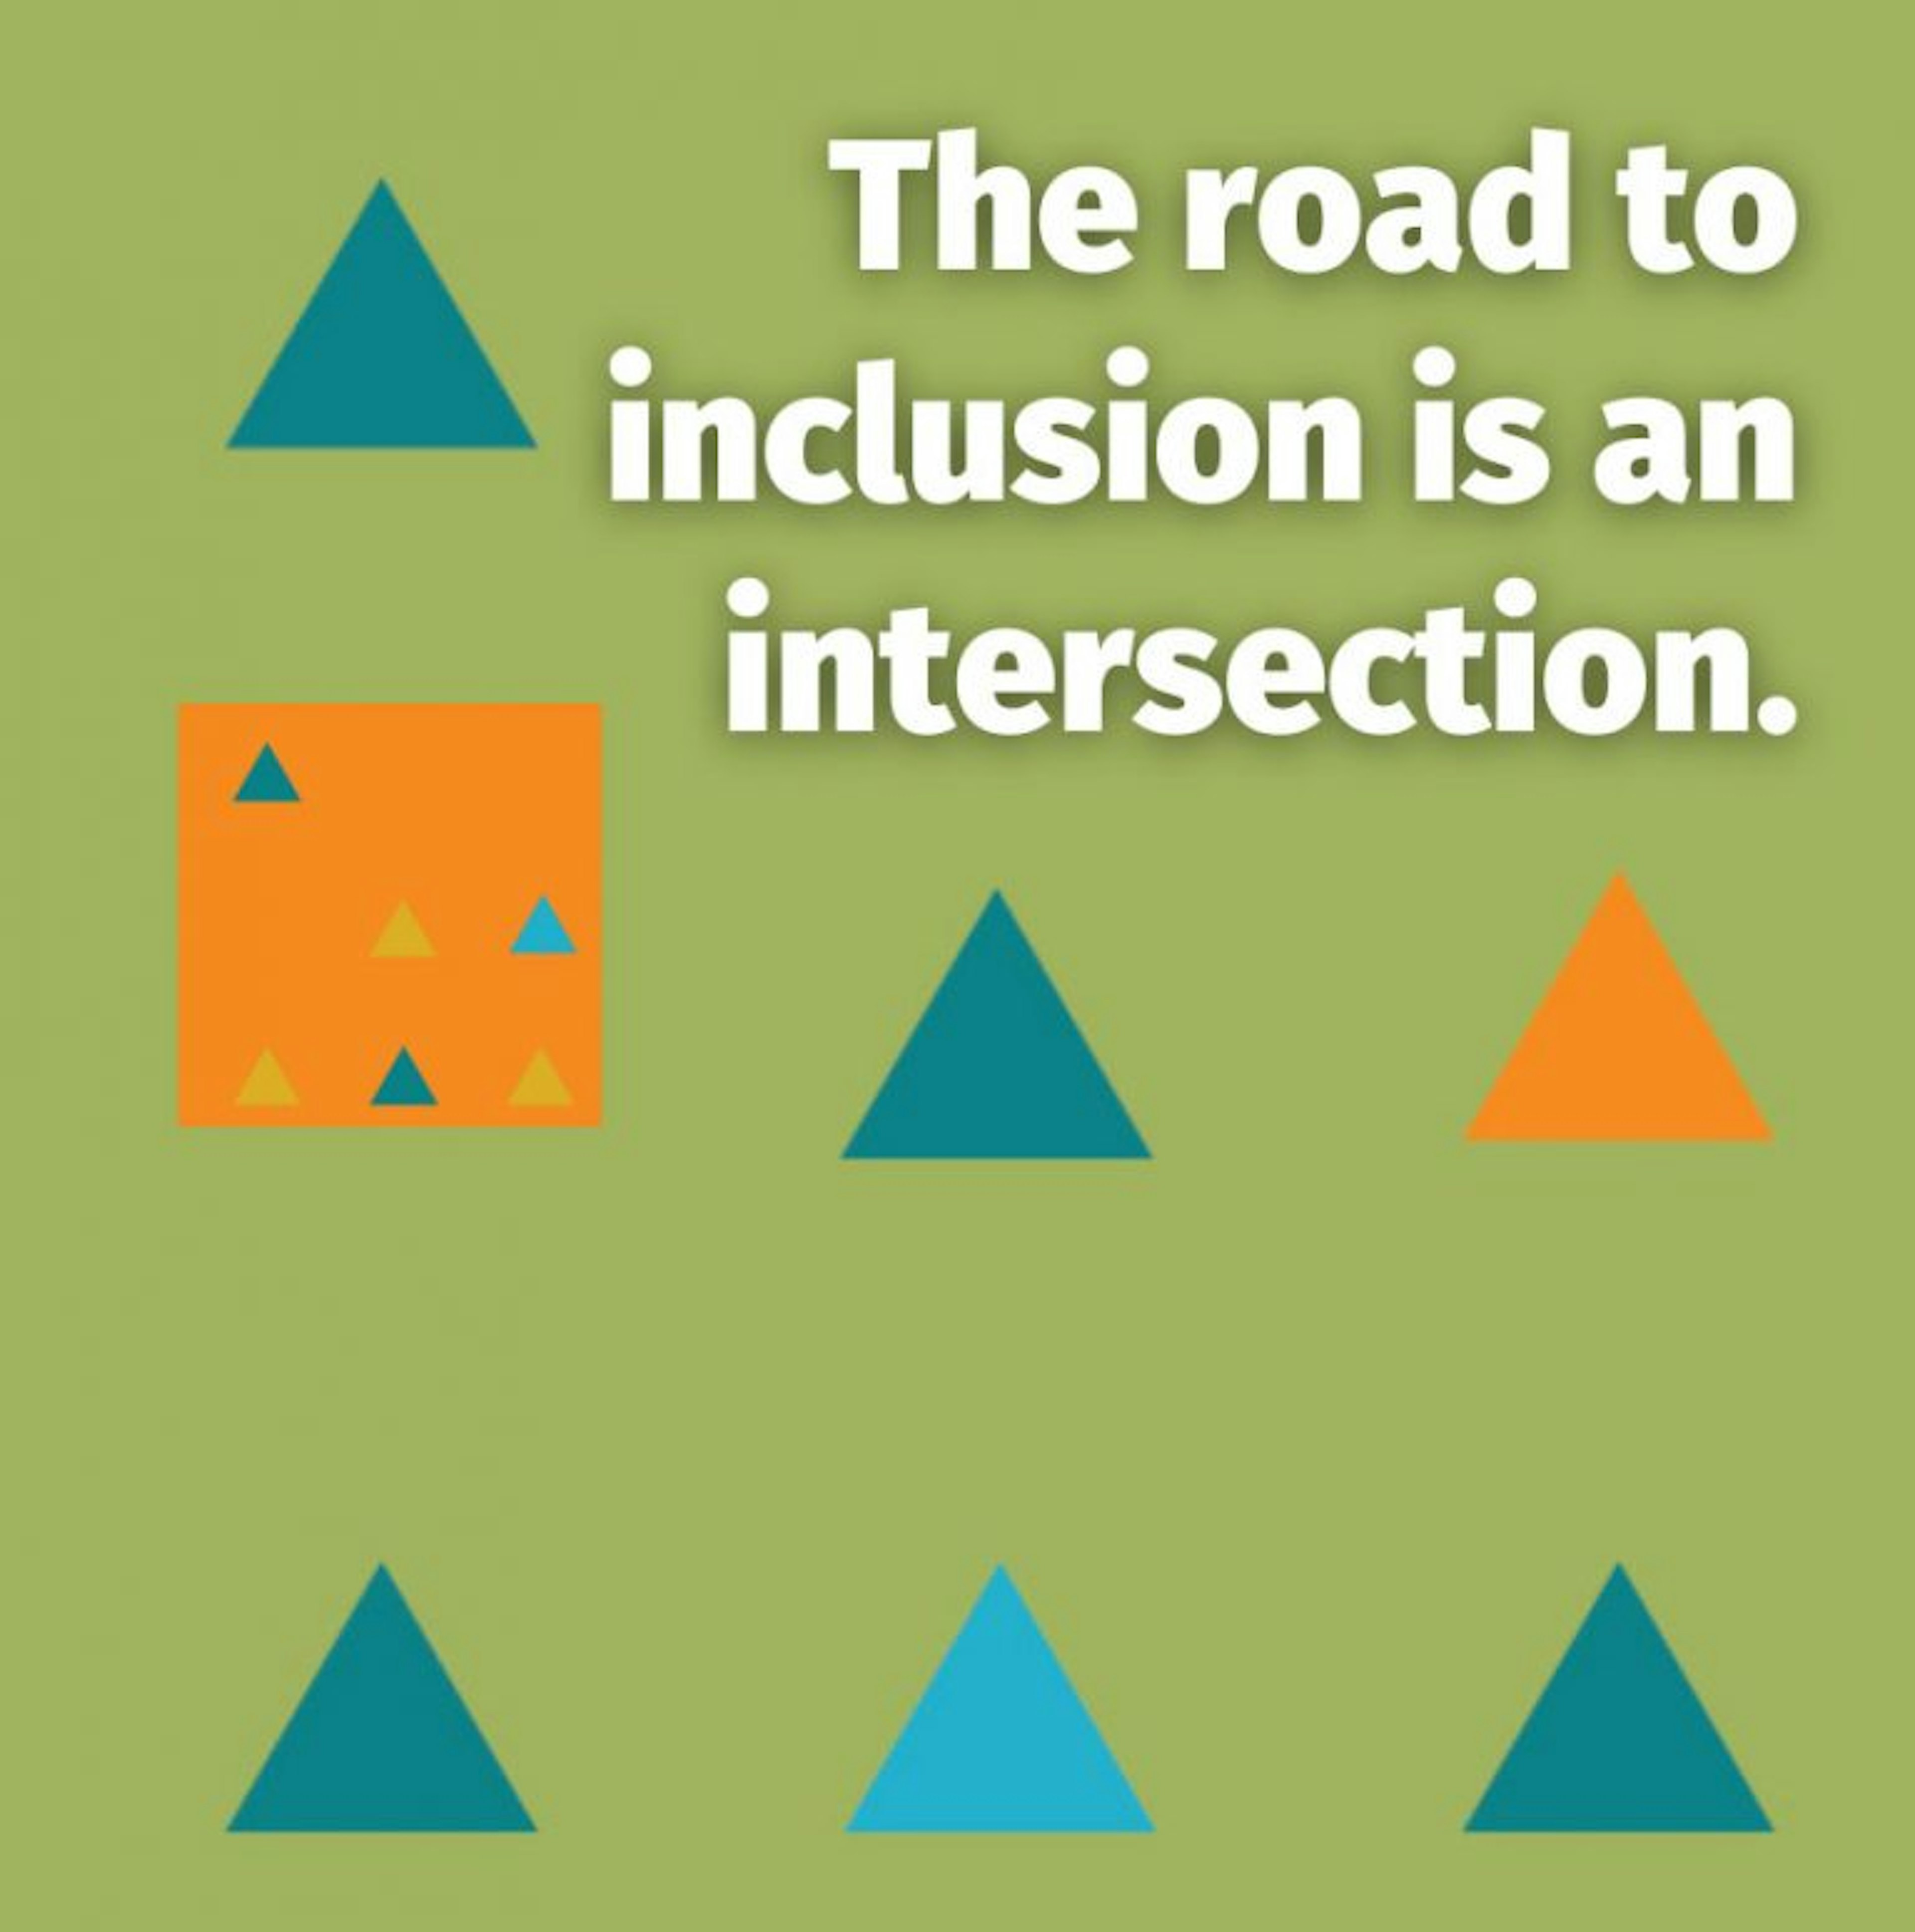 Green graphic with decorative triangles.  Text: "The road to inclusion is an intersection."